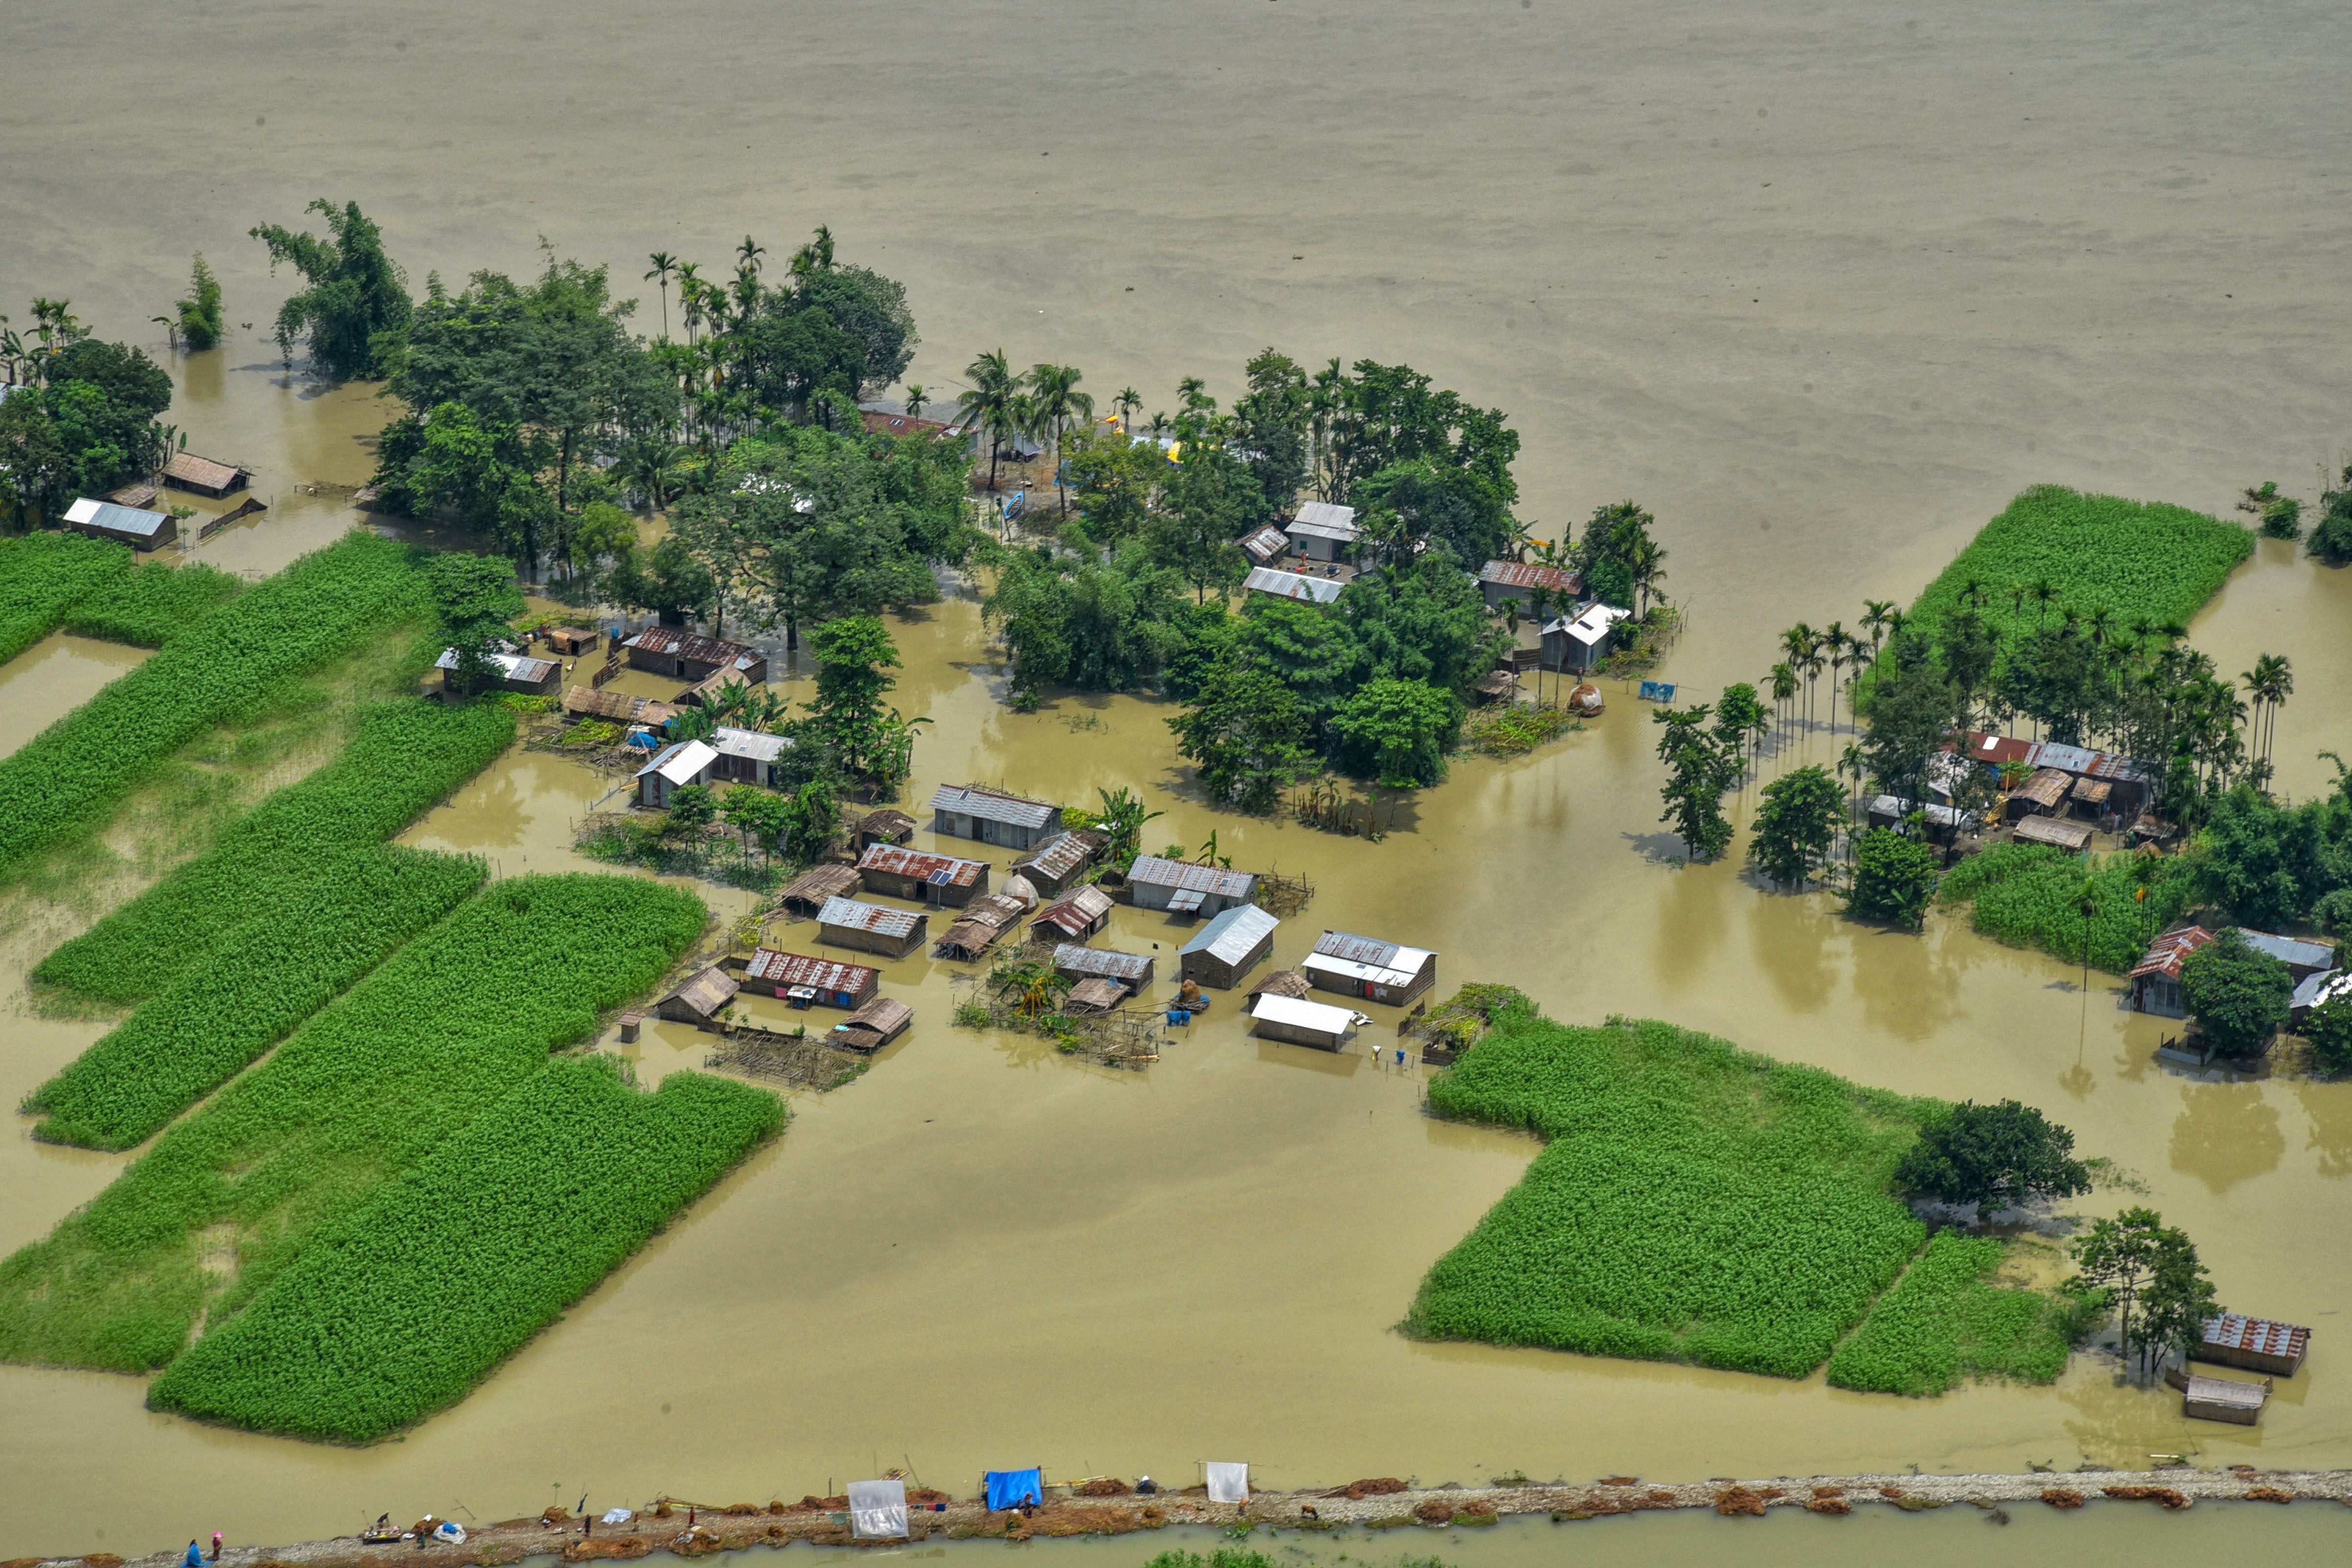 An aerial view of the flood-affected areas in Assam, Friday, July 24, 2020. So far, the flood and landslides in the state have claimed at least 119 lives. Credit: PTI Photo